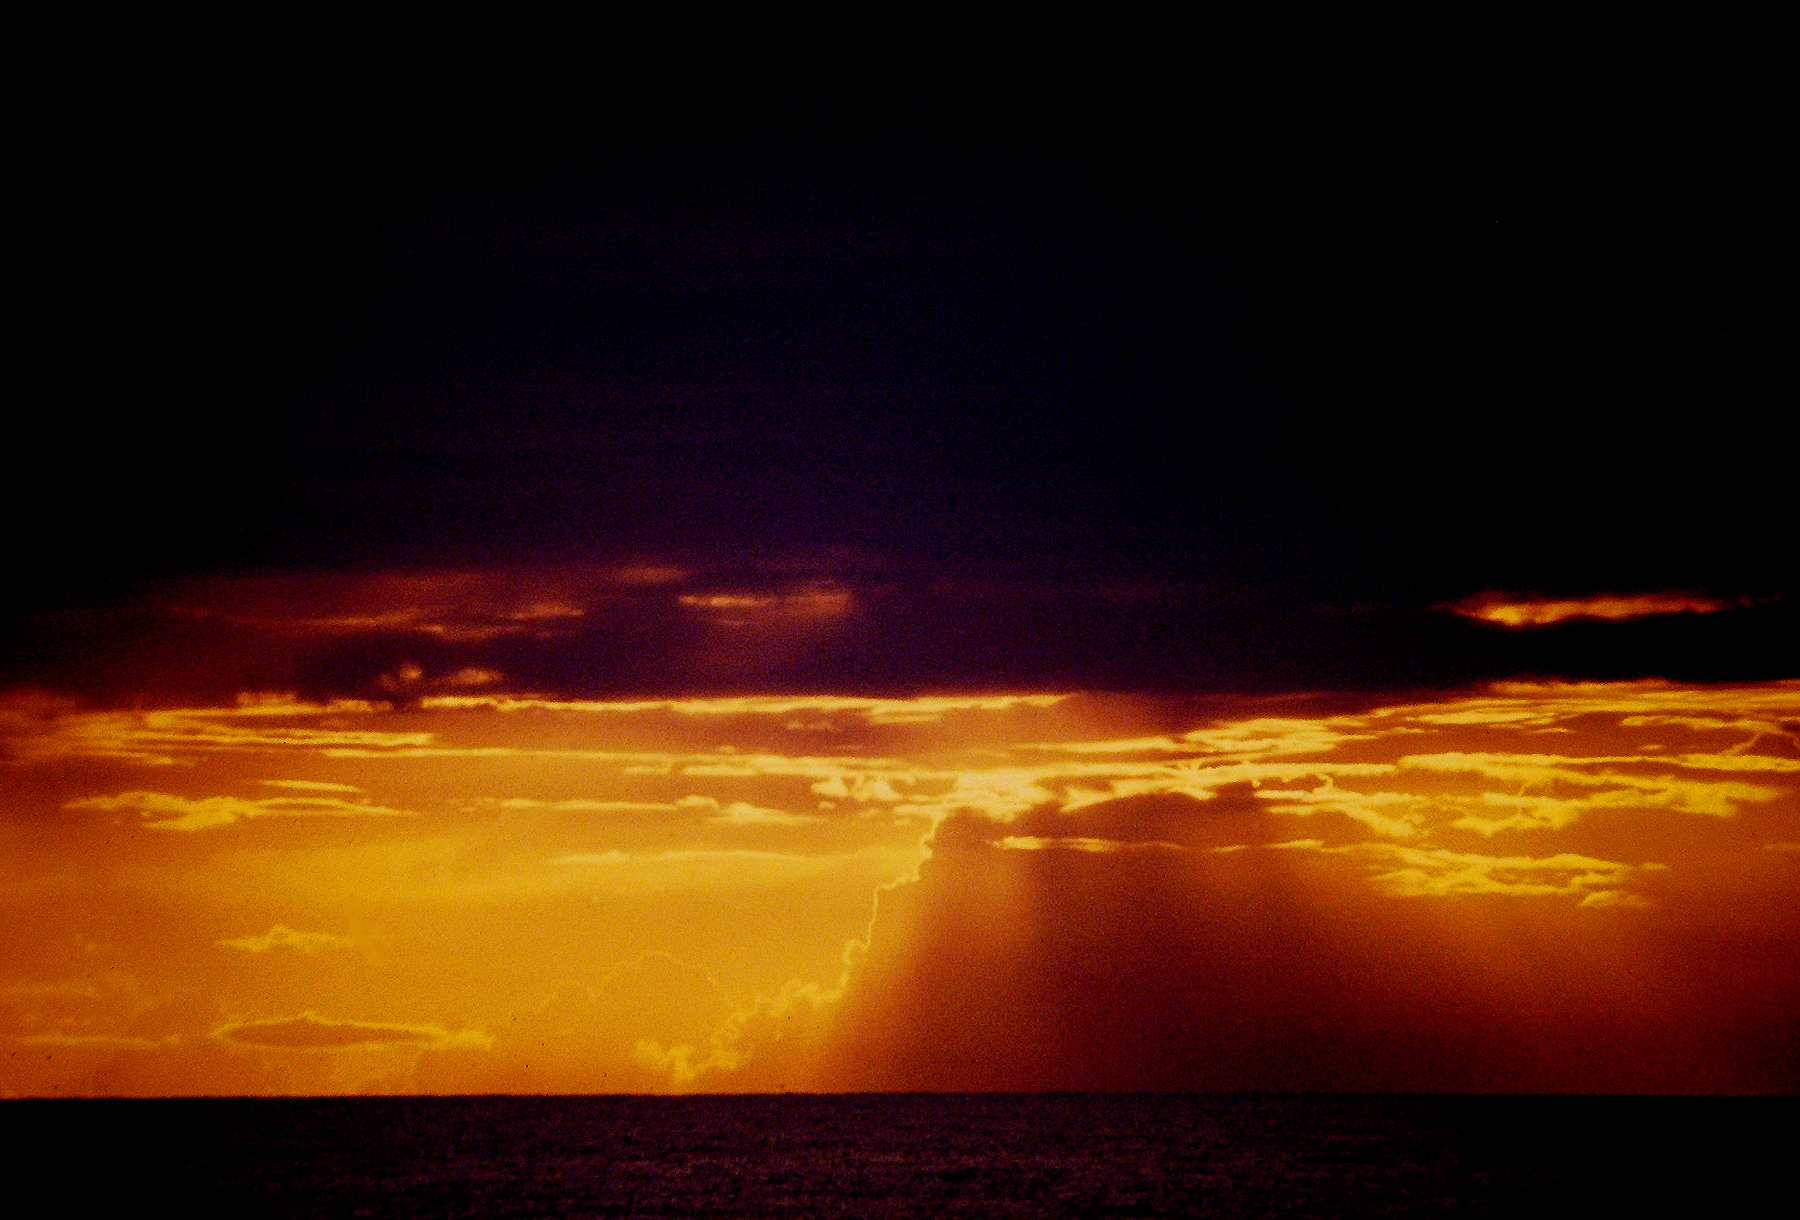 Eclipse 1973 - D39-Sunset at Sea - 5191